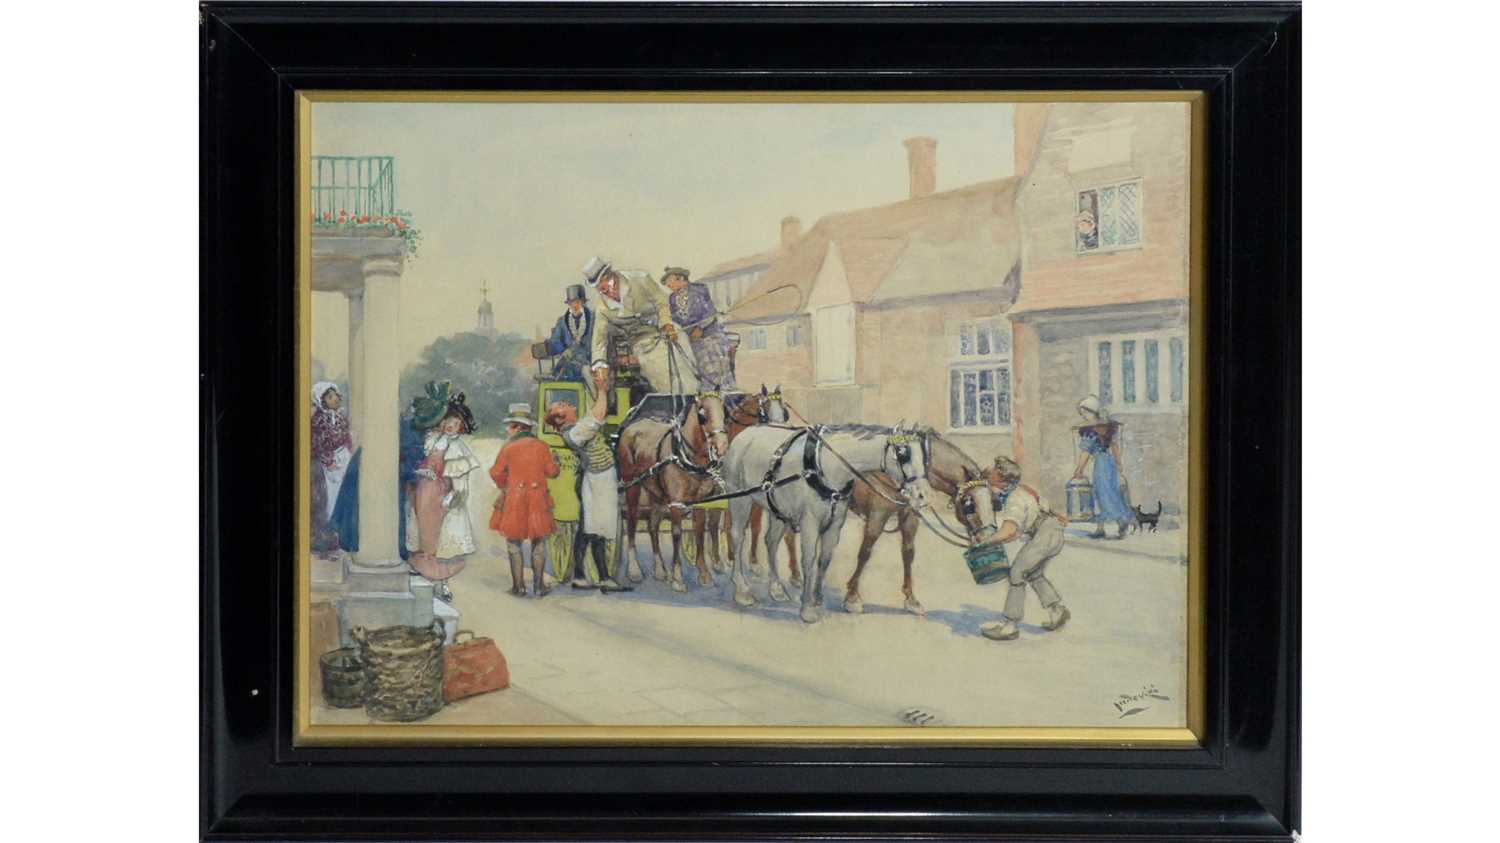 Lot 793 - 19th Century British School - The Departure of the Coach | watercolour